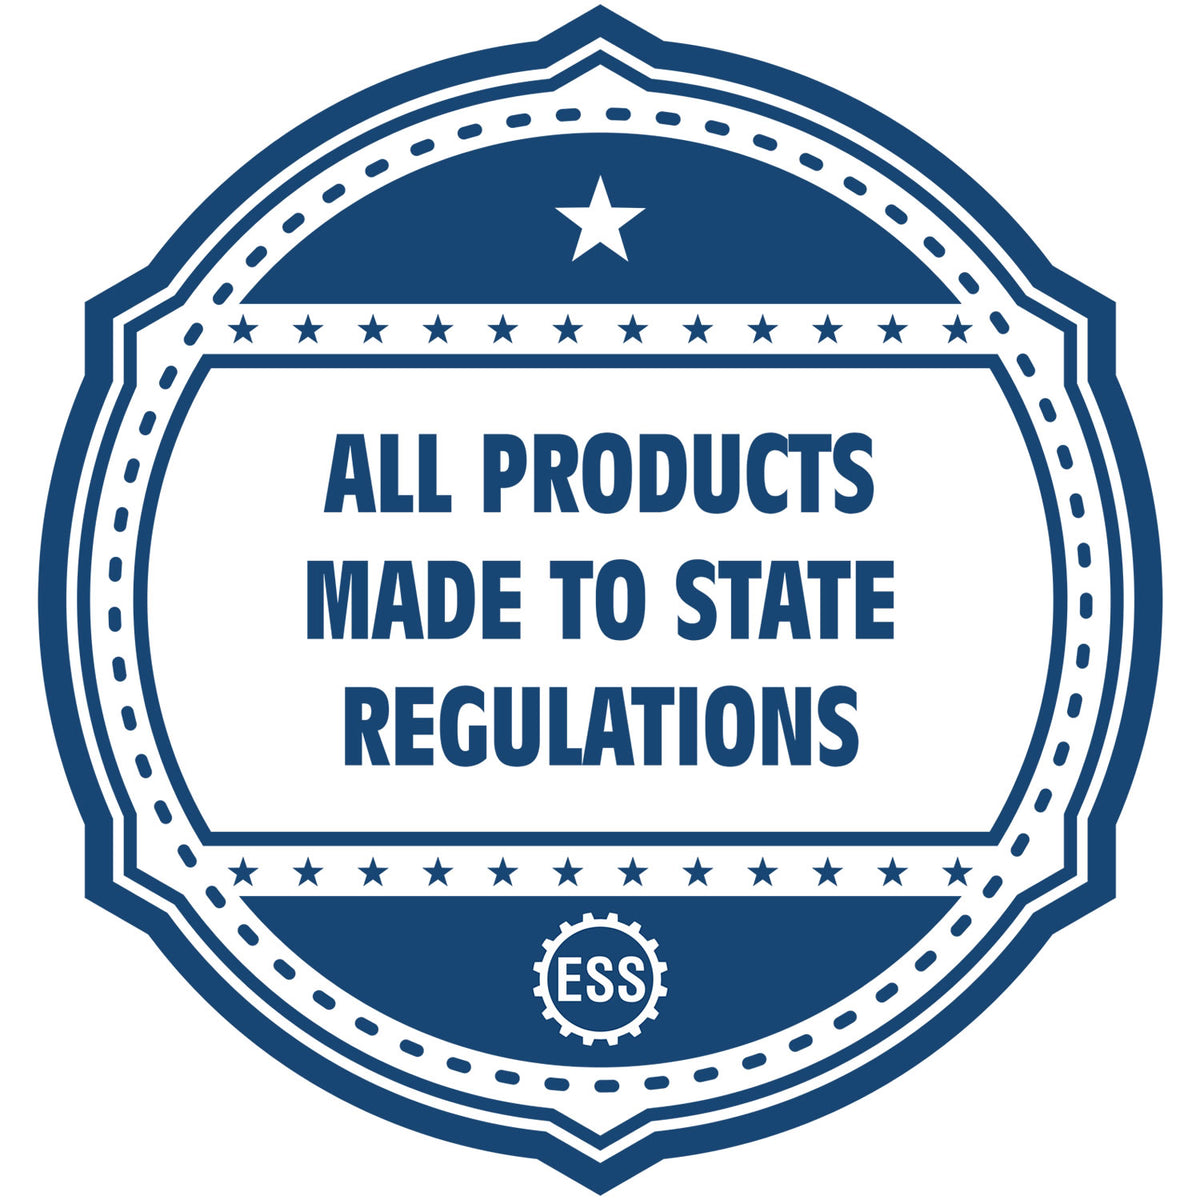 A blue icon or badge for the Hybrid Michigan Architect Seal showing that this product is made in compliance with state regulations.